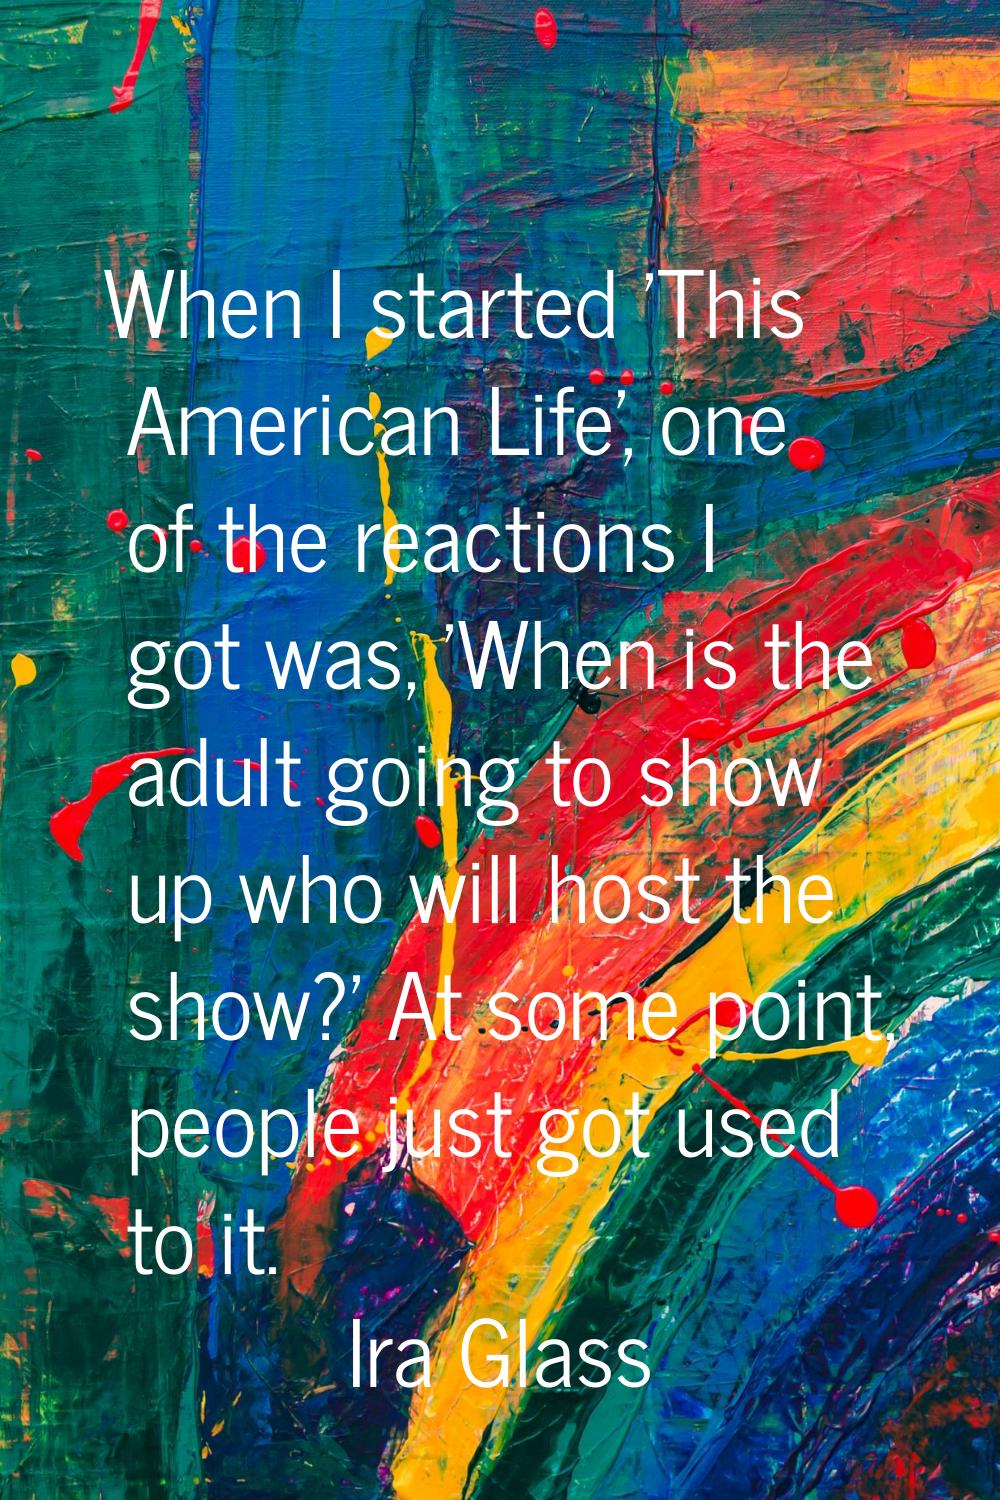 When I started 'This American Life', one of the reactions I got was, 'When is the adult going to sh